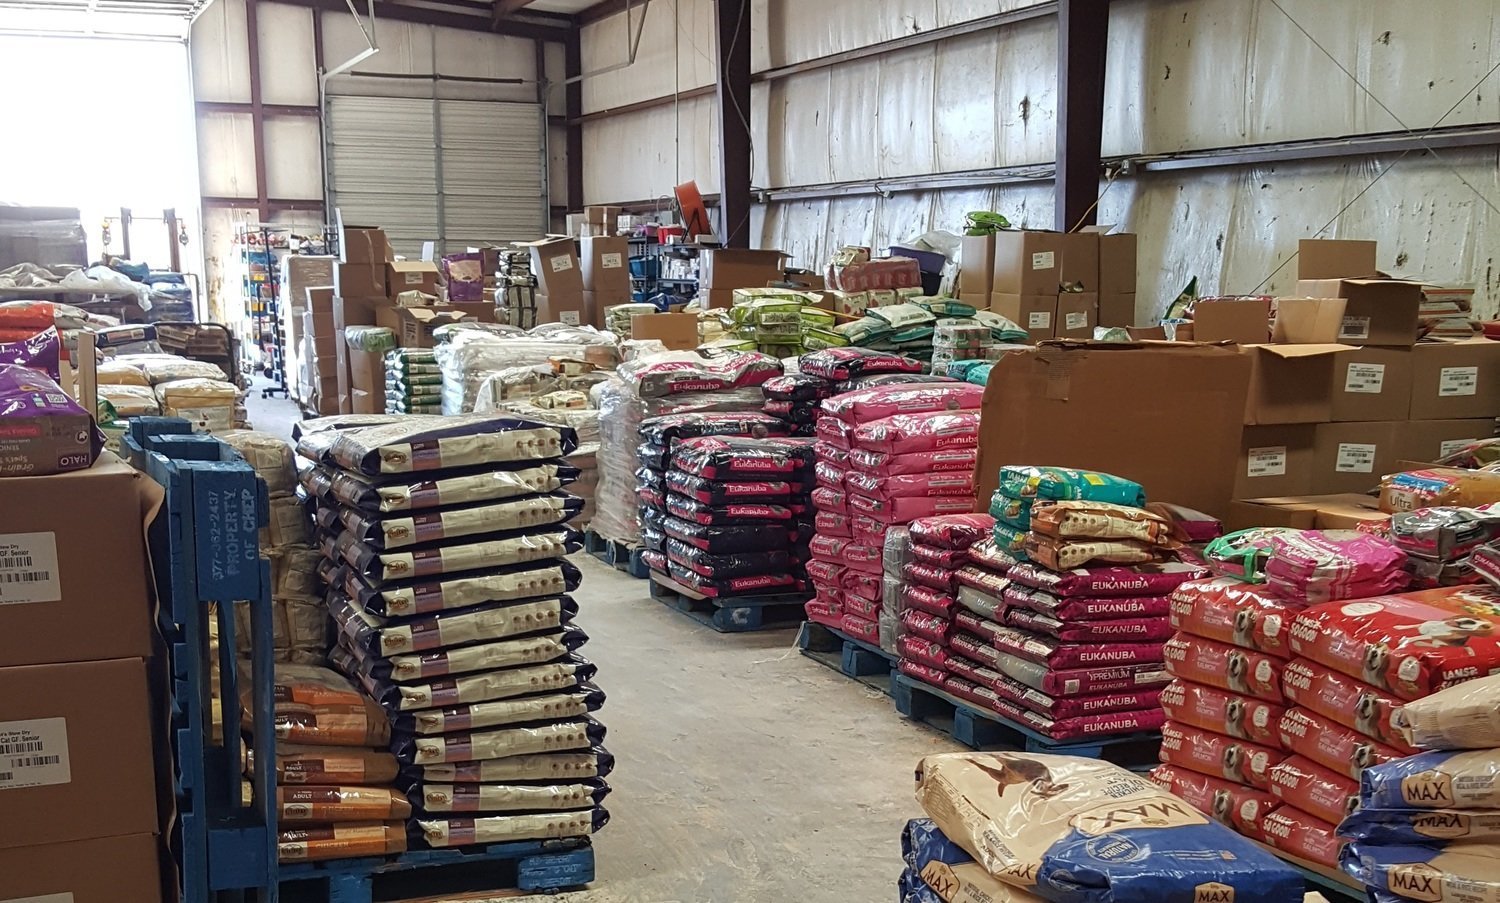 **BULK DEAL** 500 +/- Lbs.  DOG FOOD SPECIAL includes a "Variety" of High-Quality Premium Brand OR "All" Same  Brand